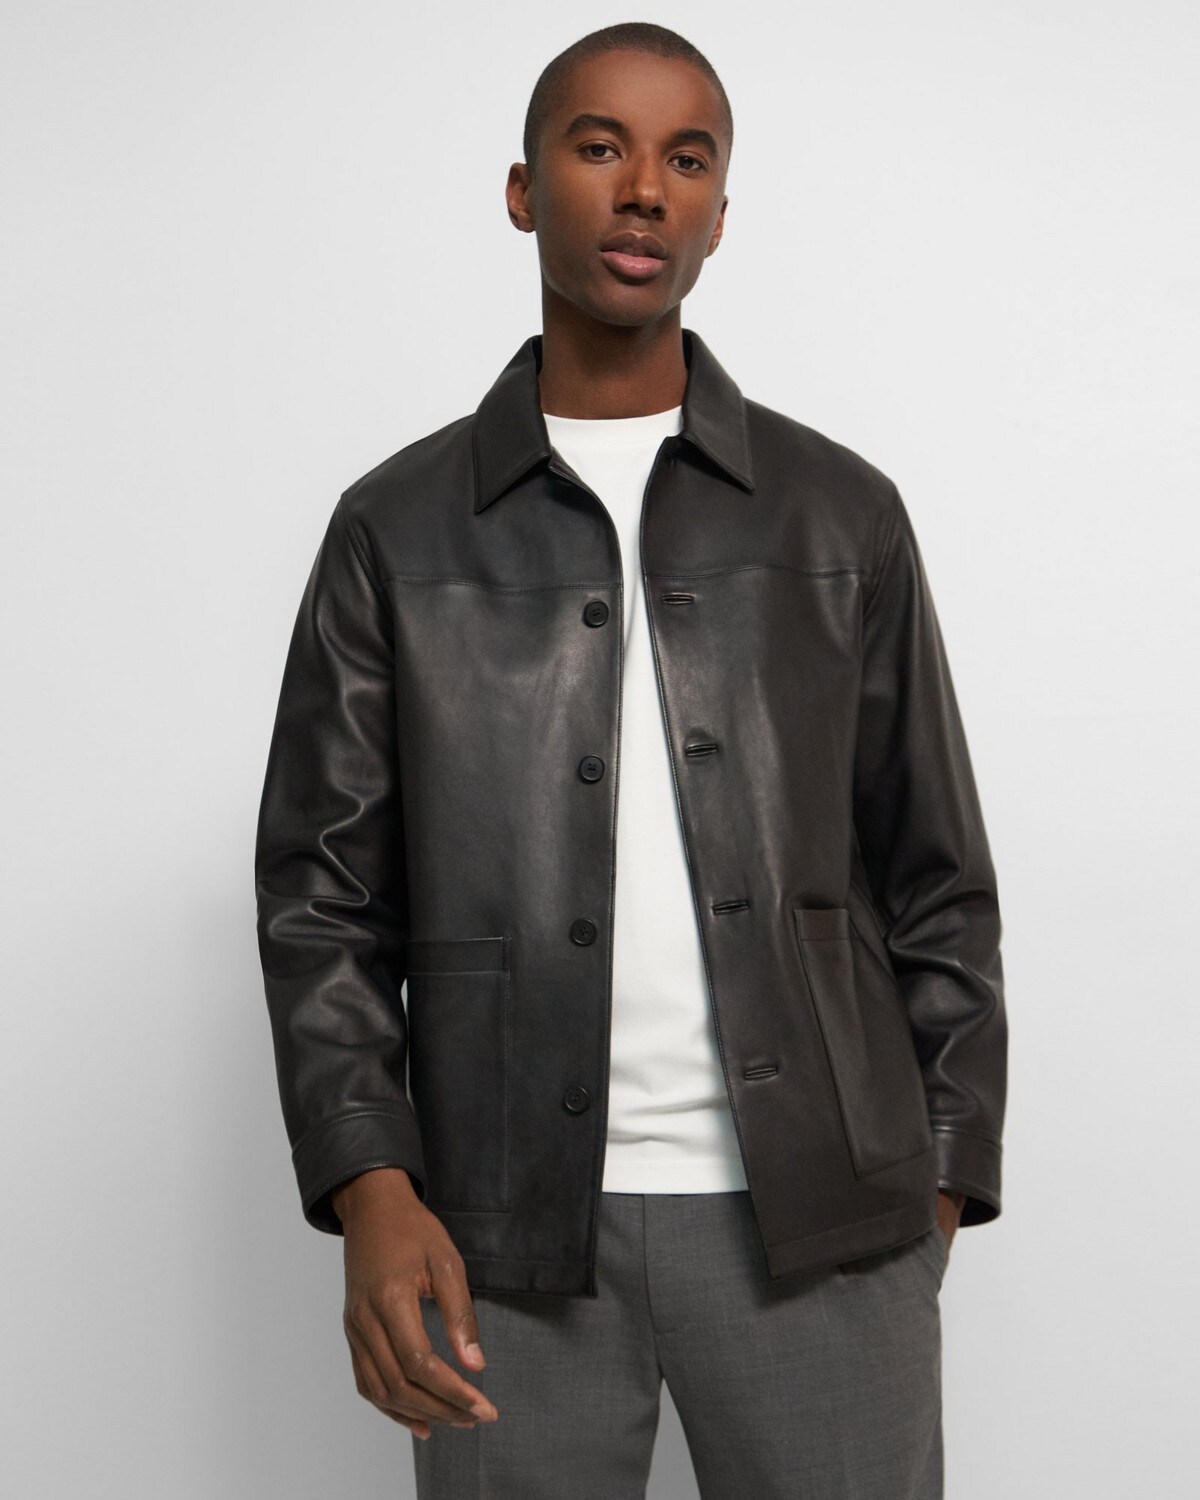 Selk Shirt Jacket in Smooth Leather